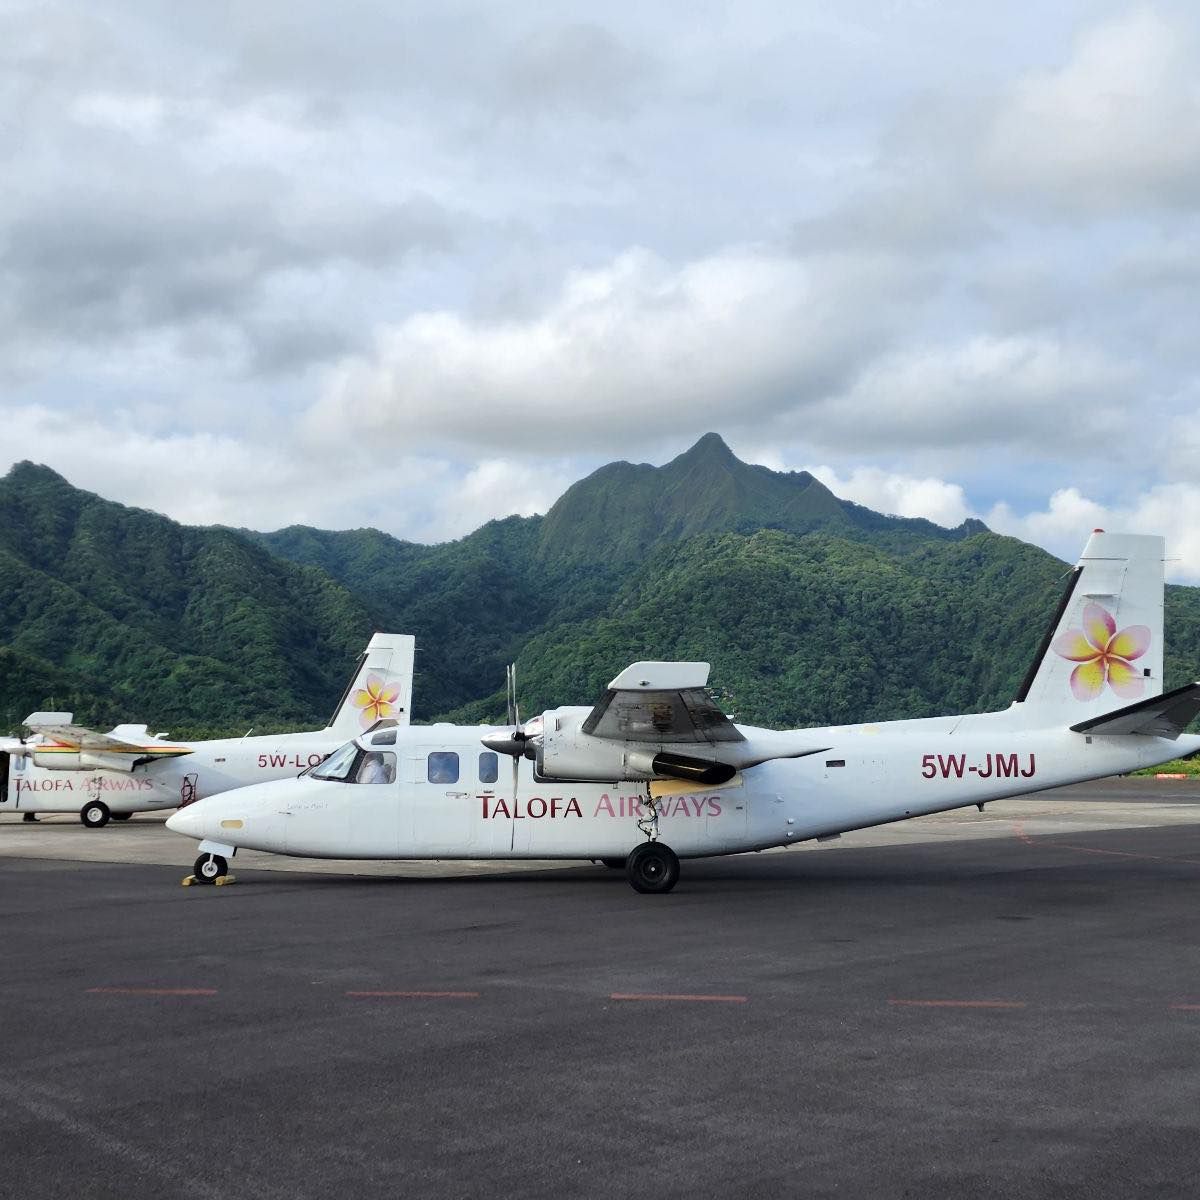 The 25-Minute Flight From Apia To Pago Pago